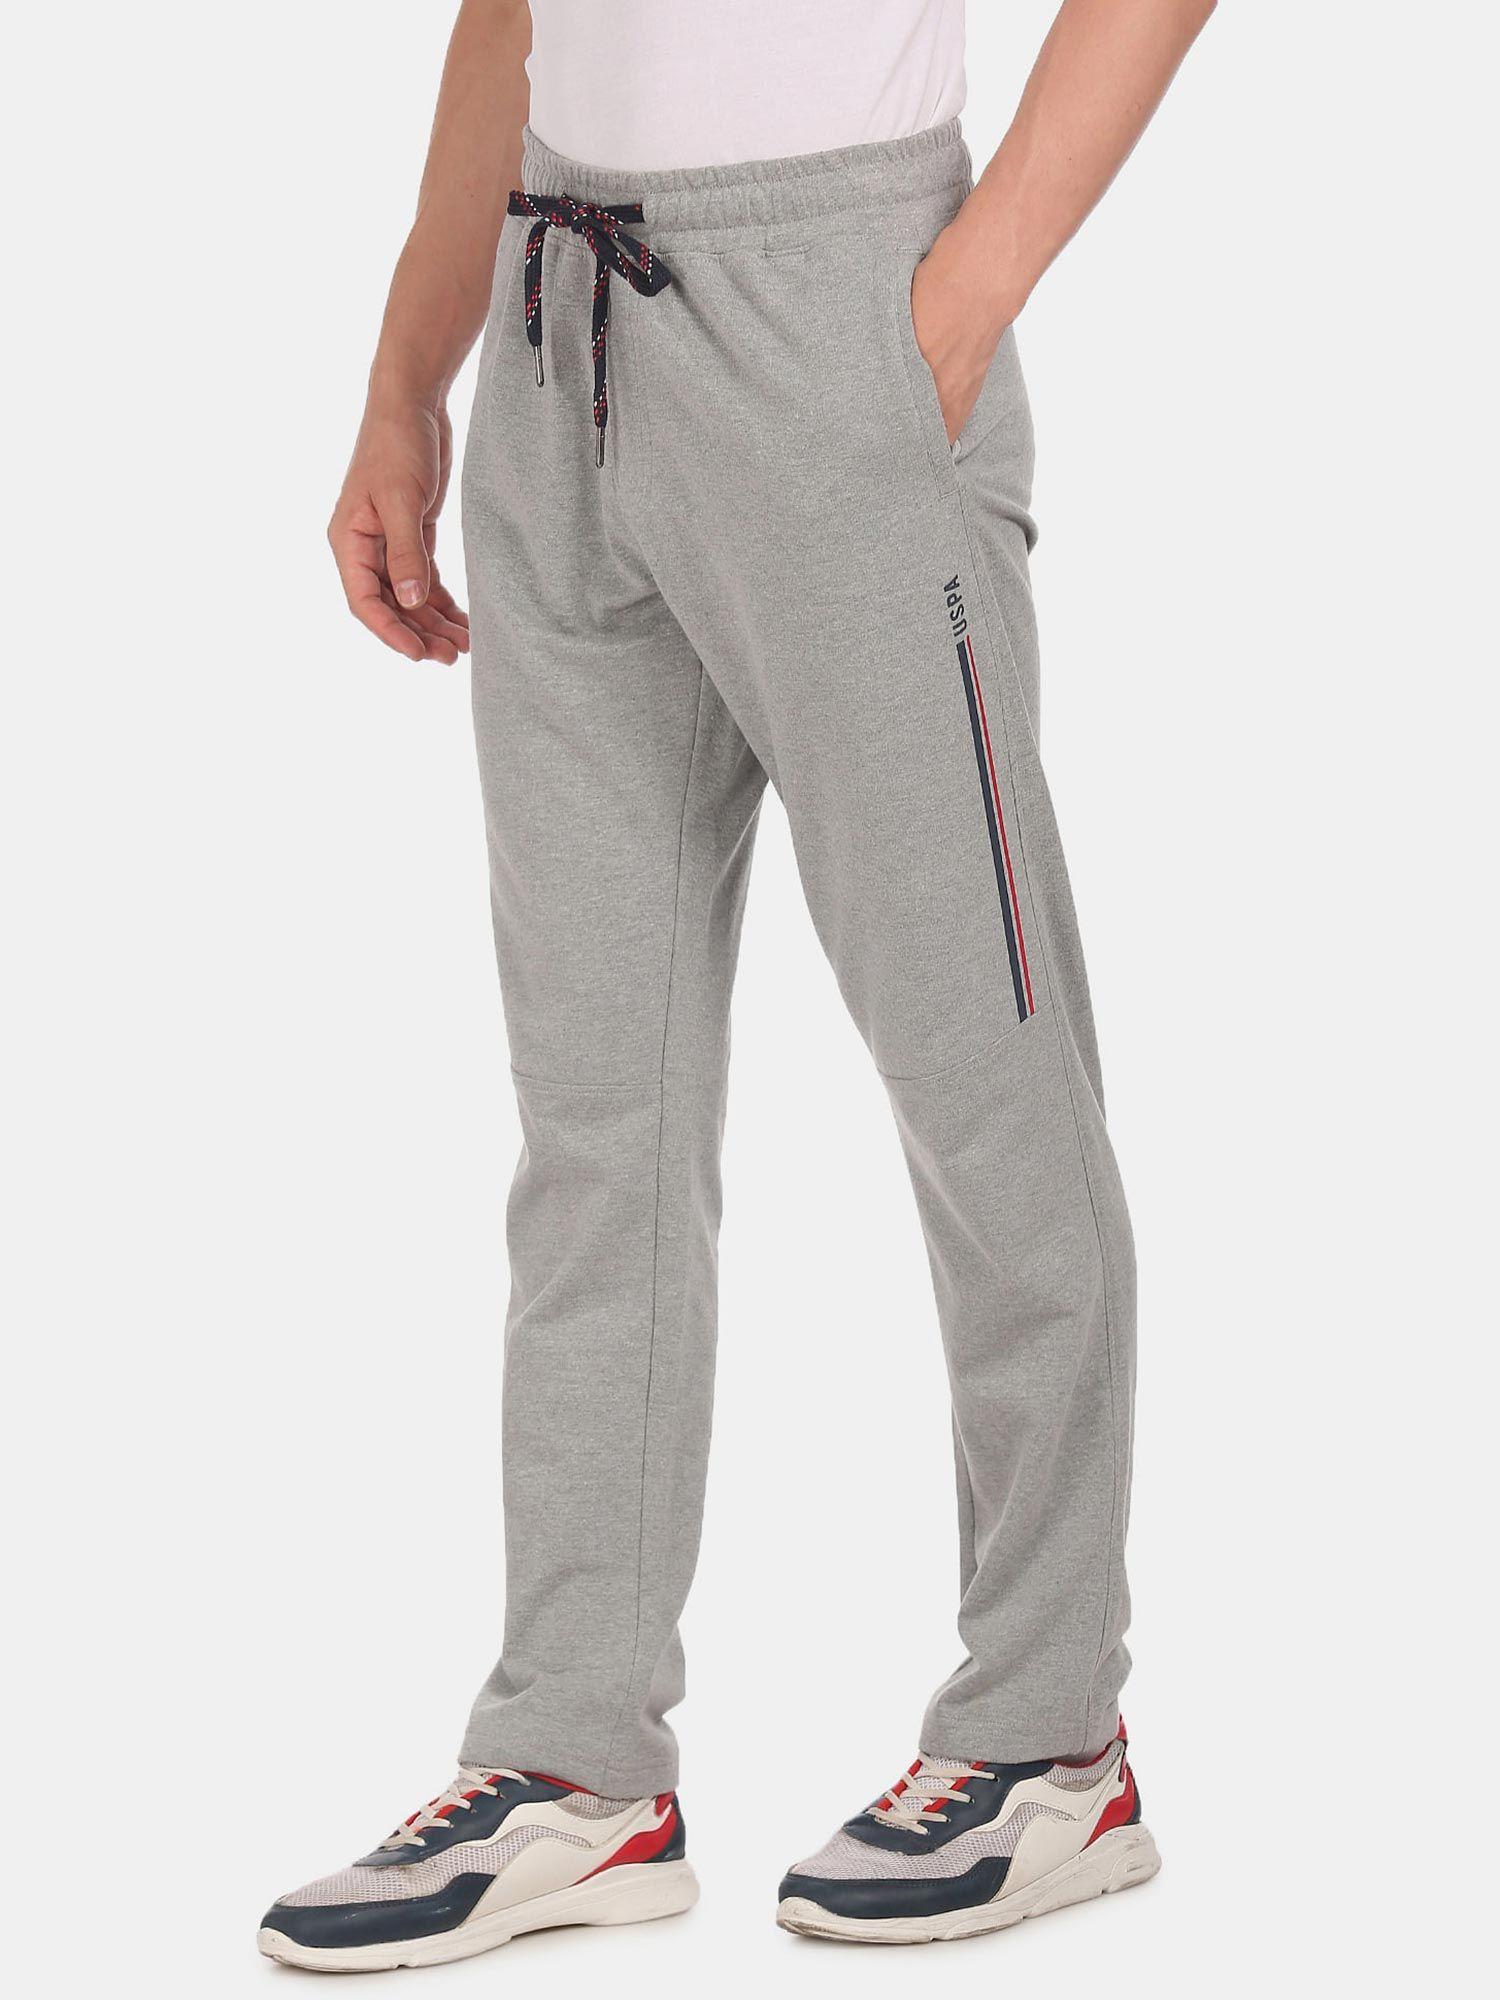 men-grey-i673-comfort-fit-solid-cotton-polyester-lounge-pants-grey